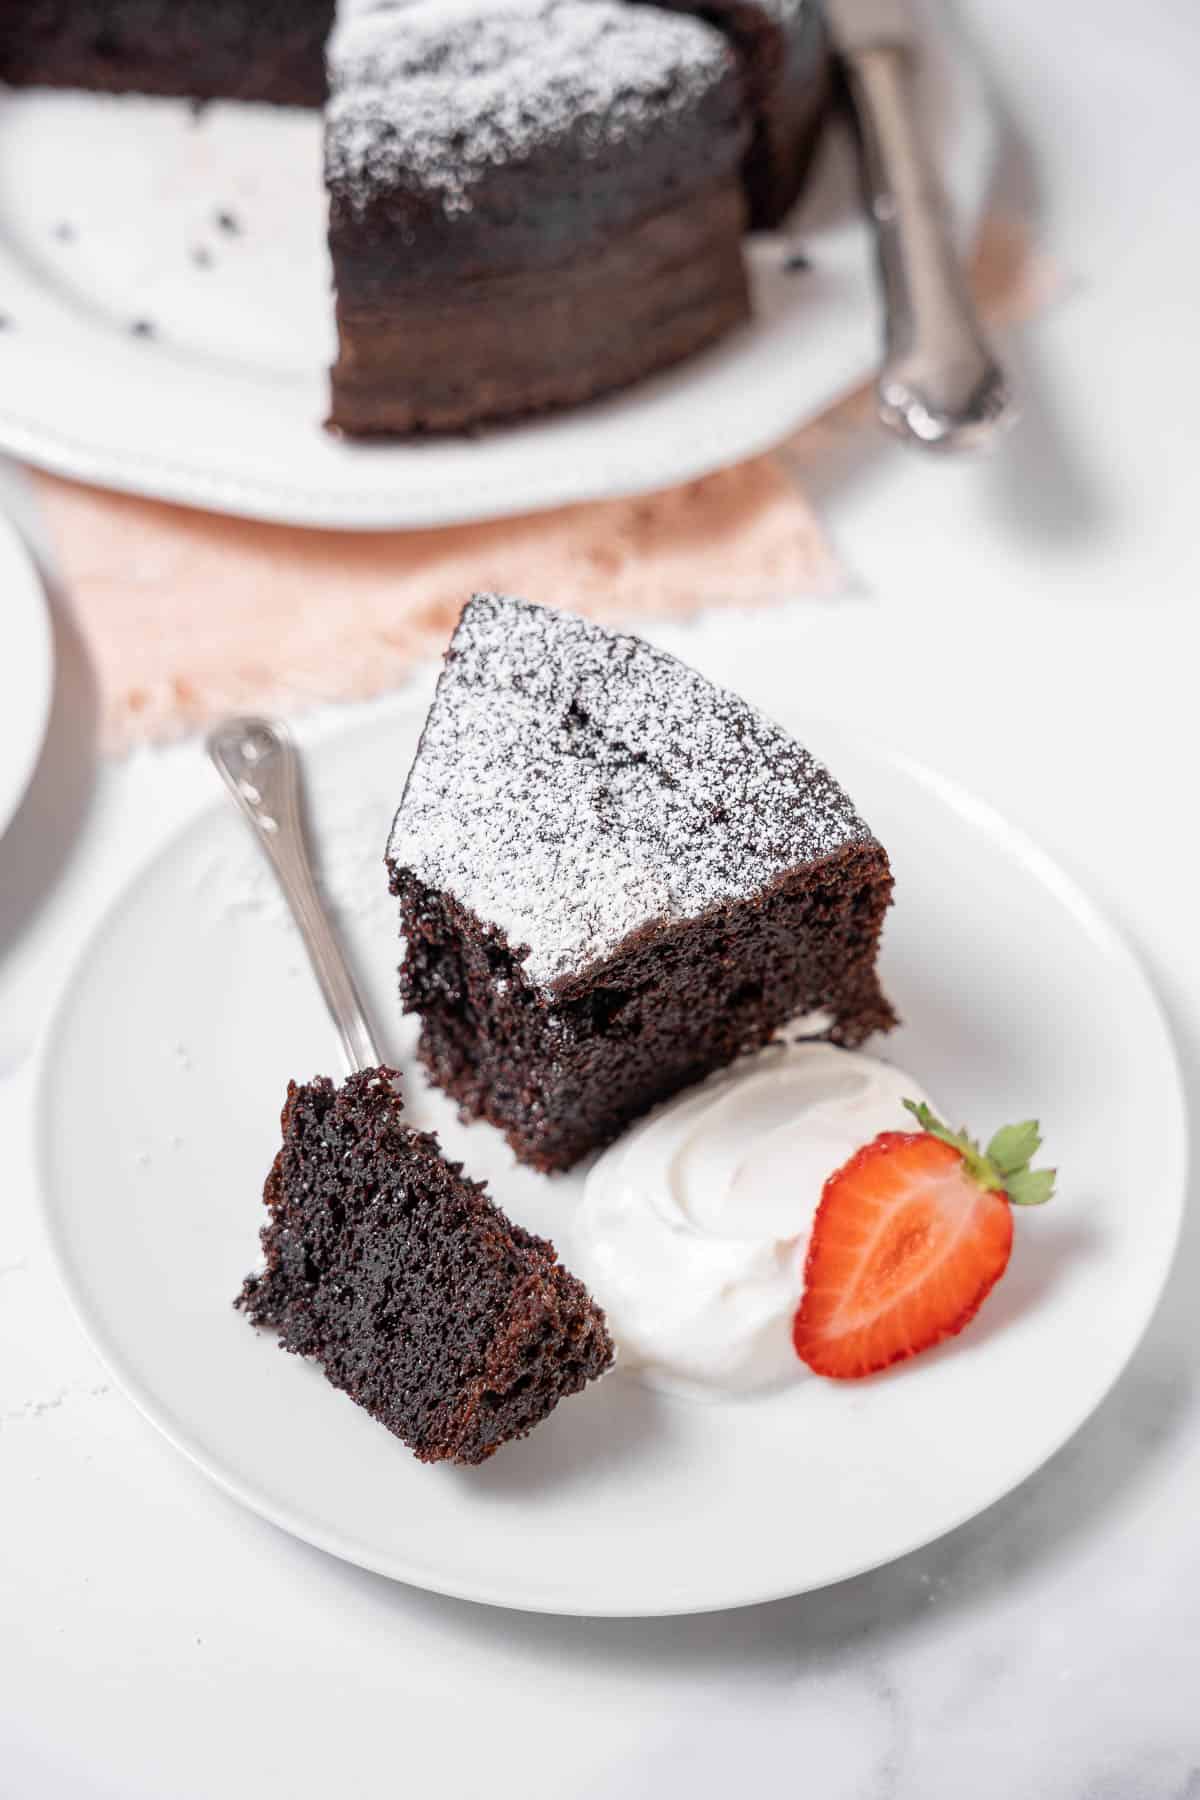 slice of chocolate olive oil cake with a strawberry.